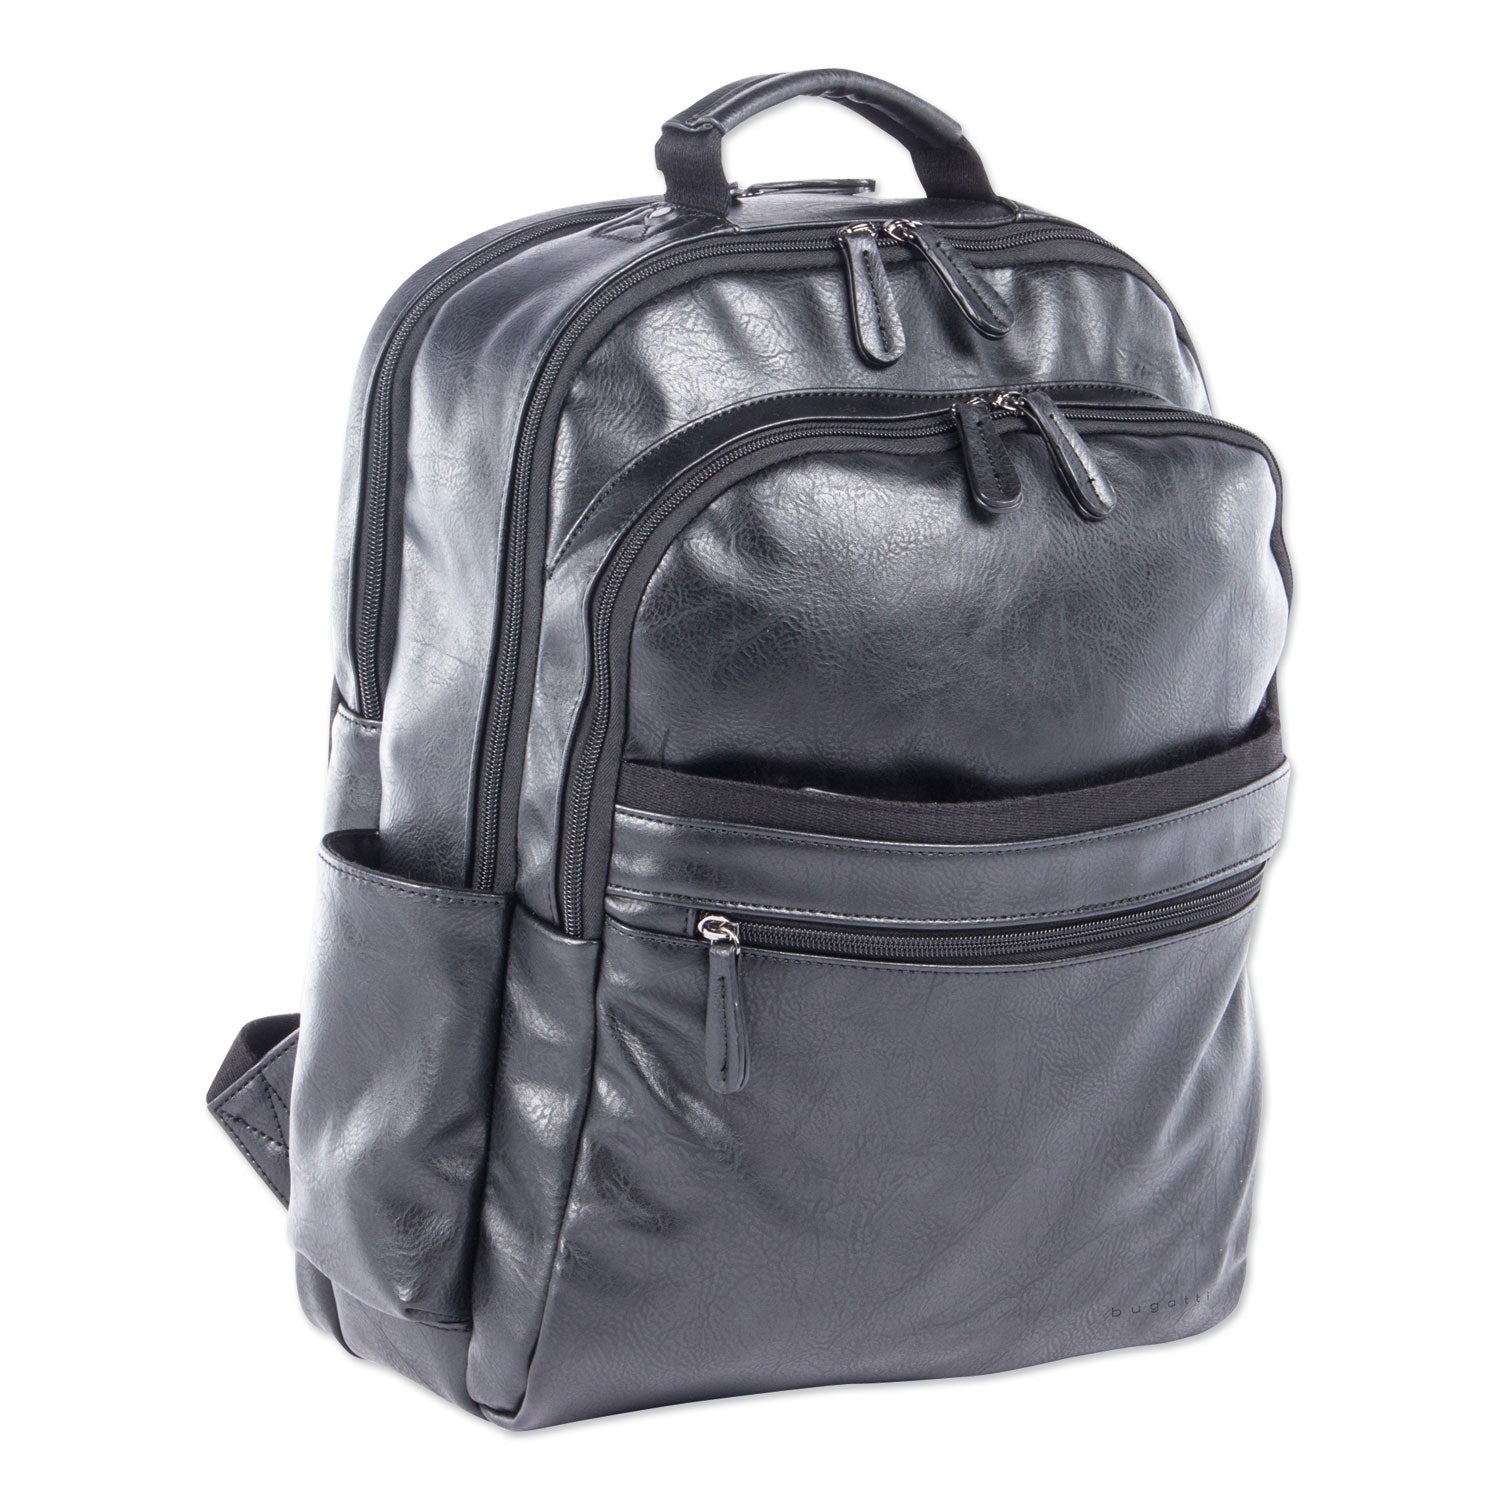 valais-backpack-fits-devices-up-to-156-leather-55-x-55-x-165-black_swzbkp116smbk - 1